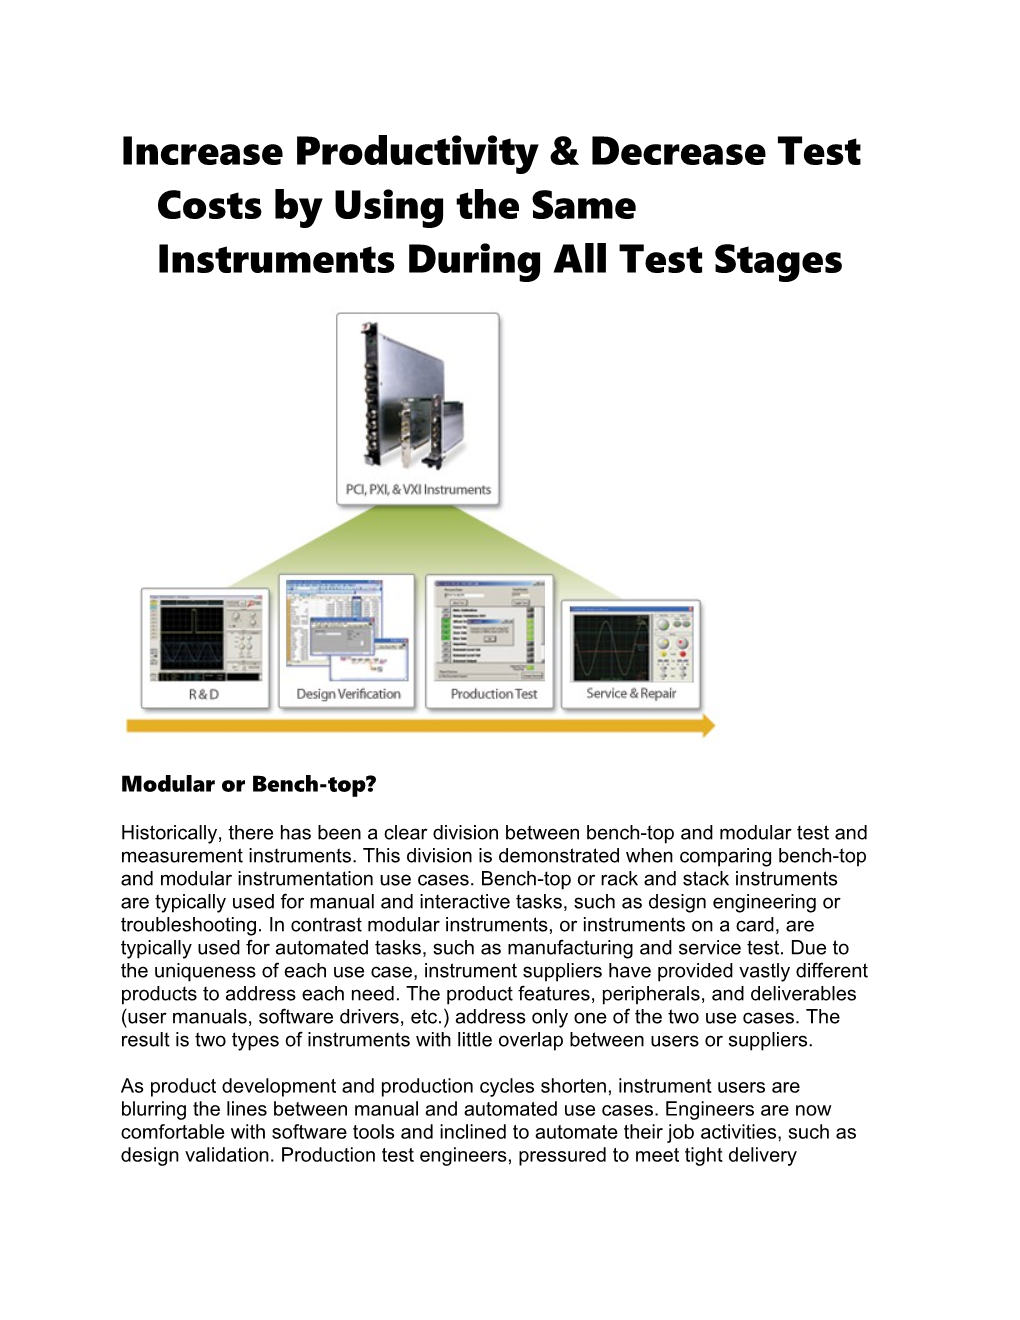 Increase Productivity & Decrease Test Costs by Using the Same Instruments During All Test Stages